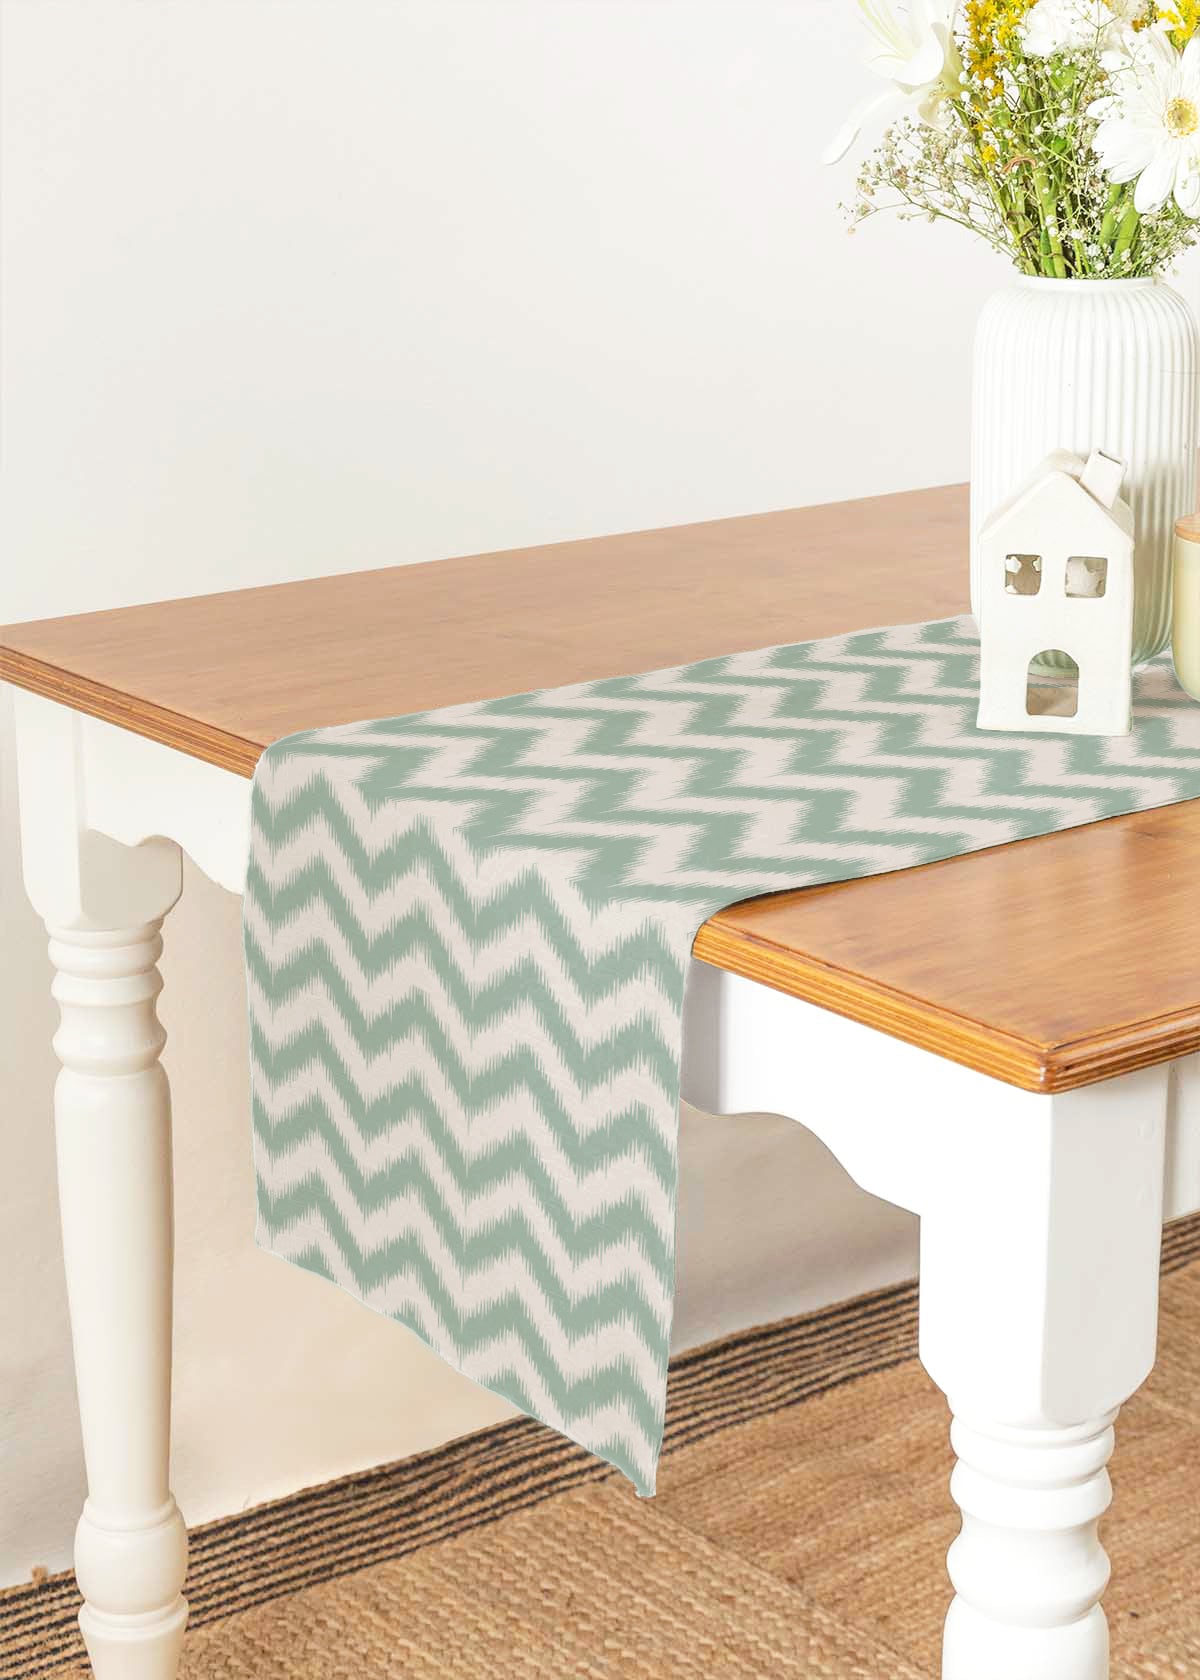 Ikat 100% cotton geometric table runner for 4 seater or 6 seater dining - Grey